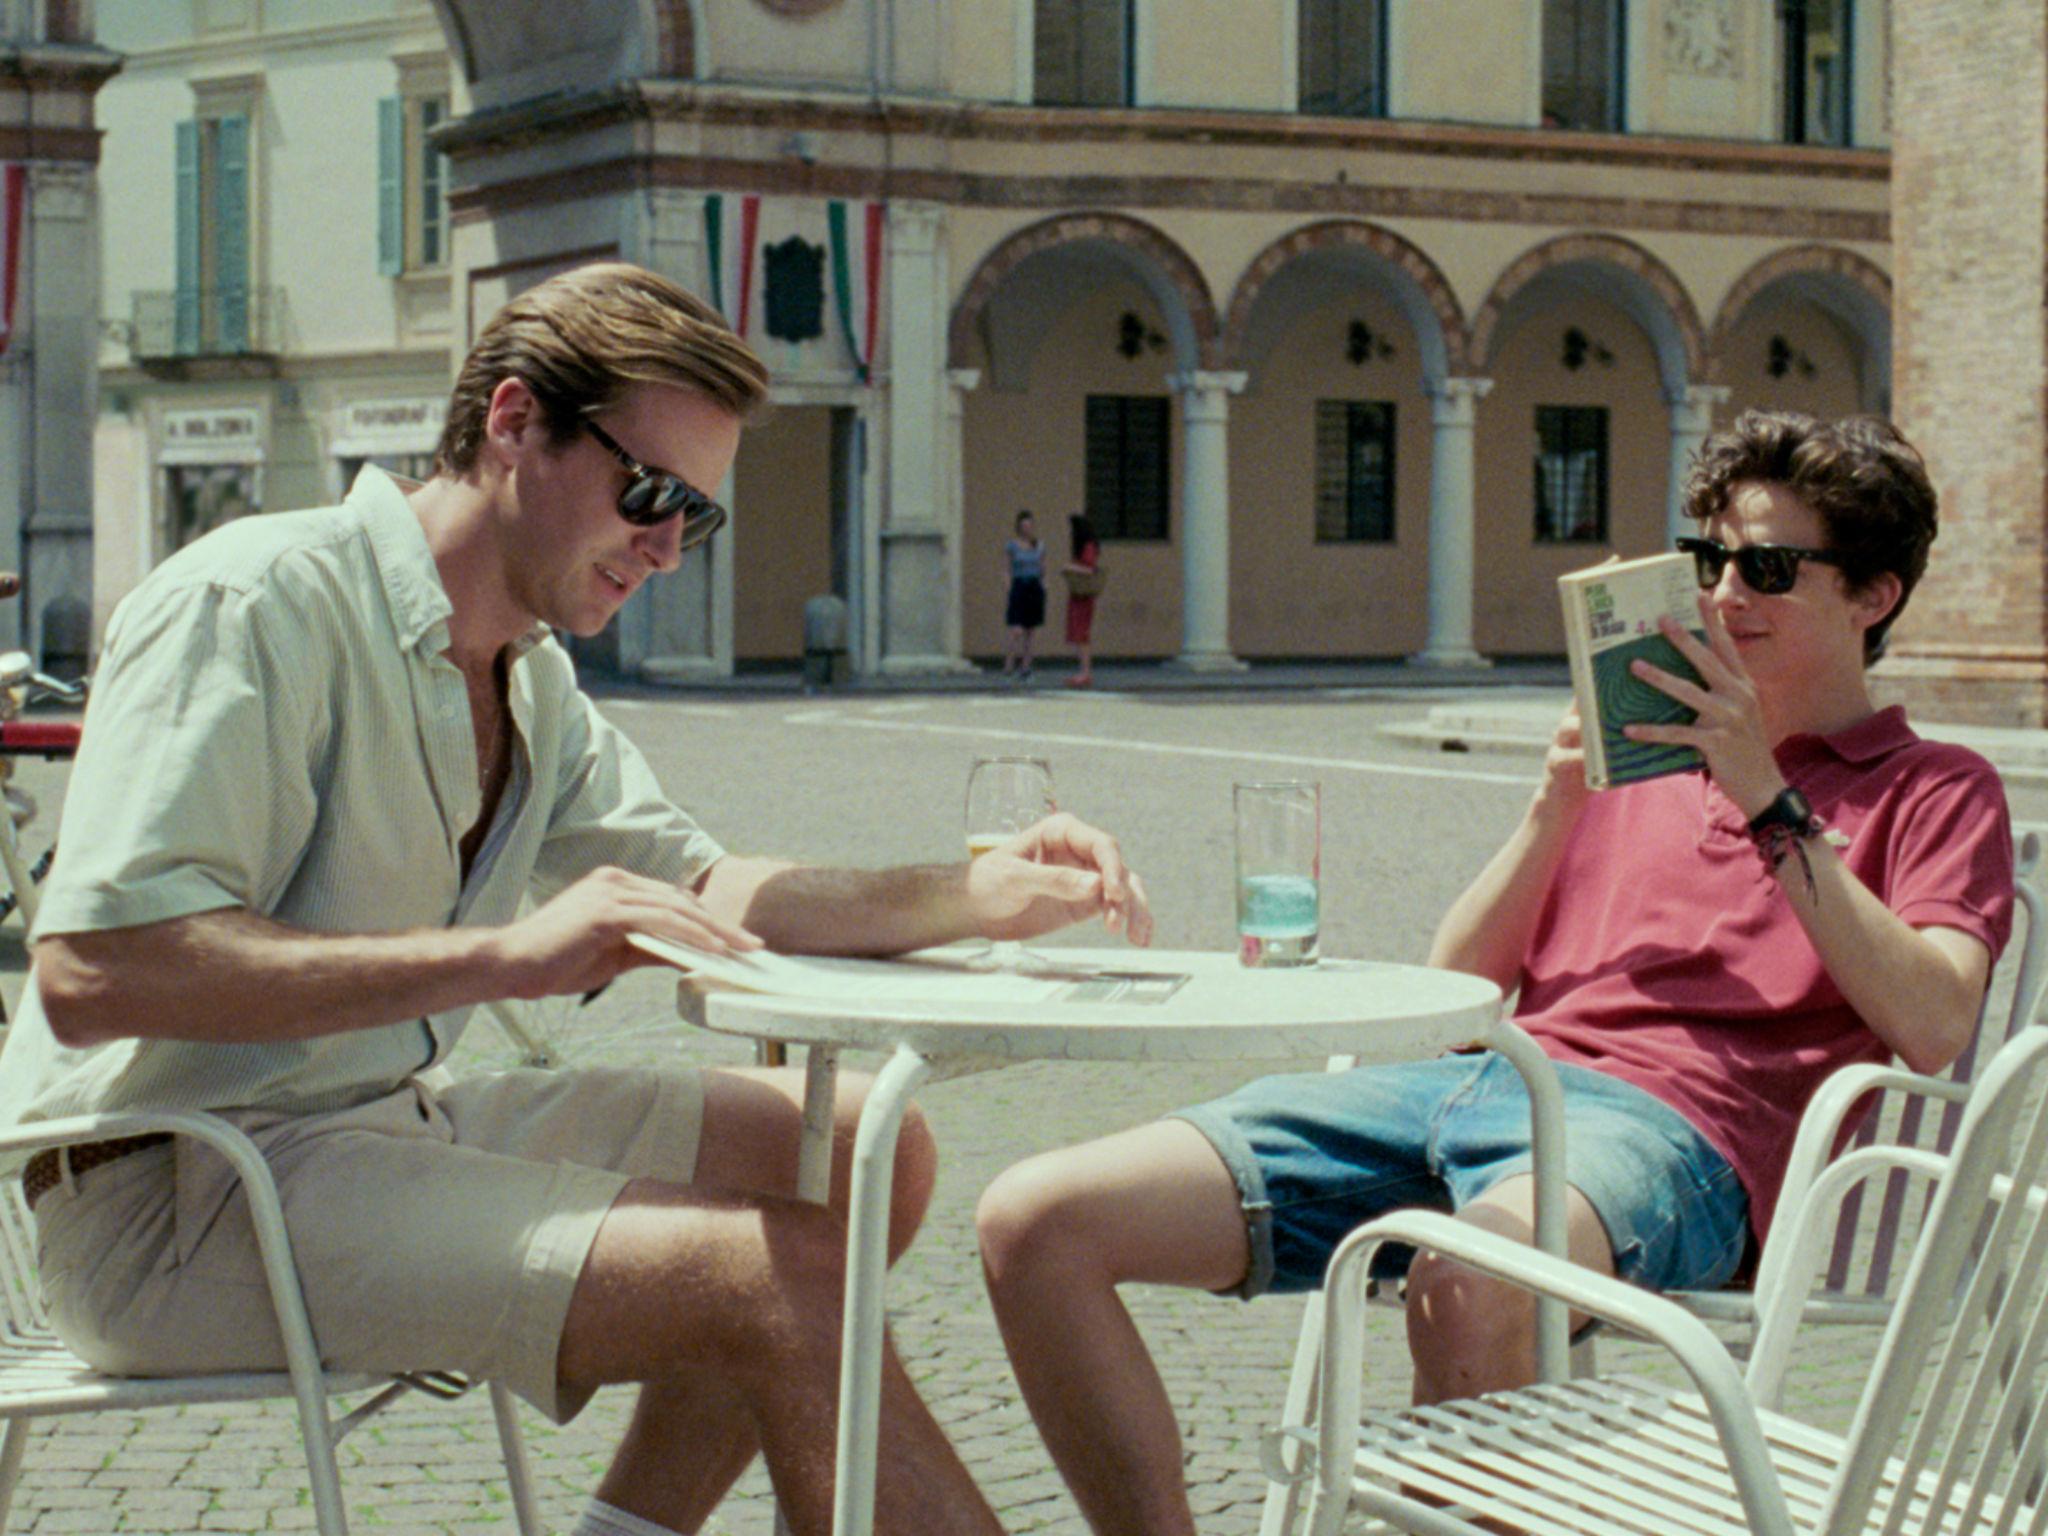 Armie Hammer as Oliver (left) and Timothée Chalamet as Elio in Luca Guadagnino’s film ‘Call Me By Your Name’